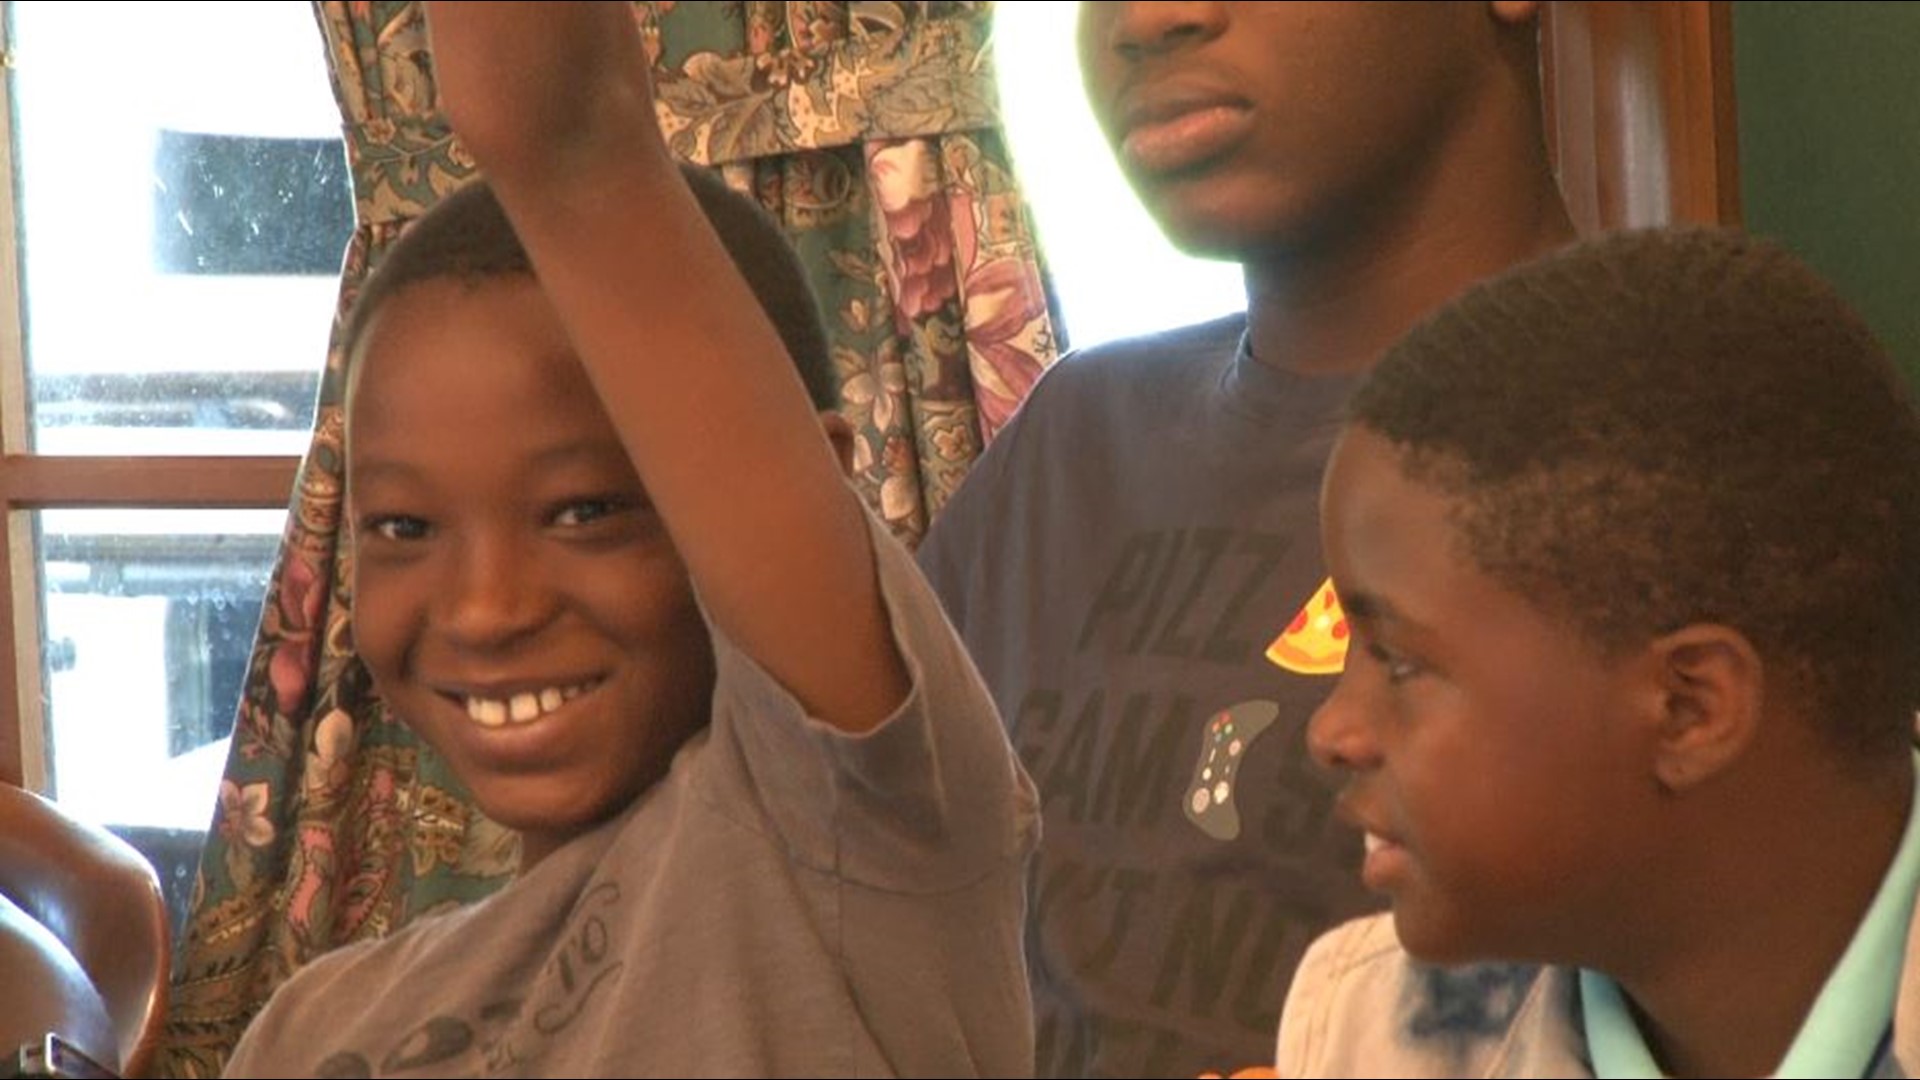 The Adopt-a-Role Model program has been helping at risk youth for 29 years